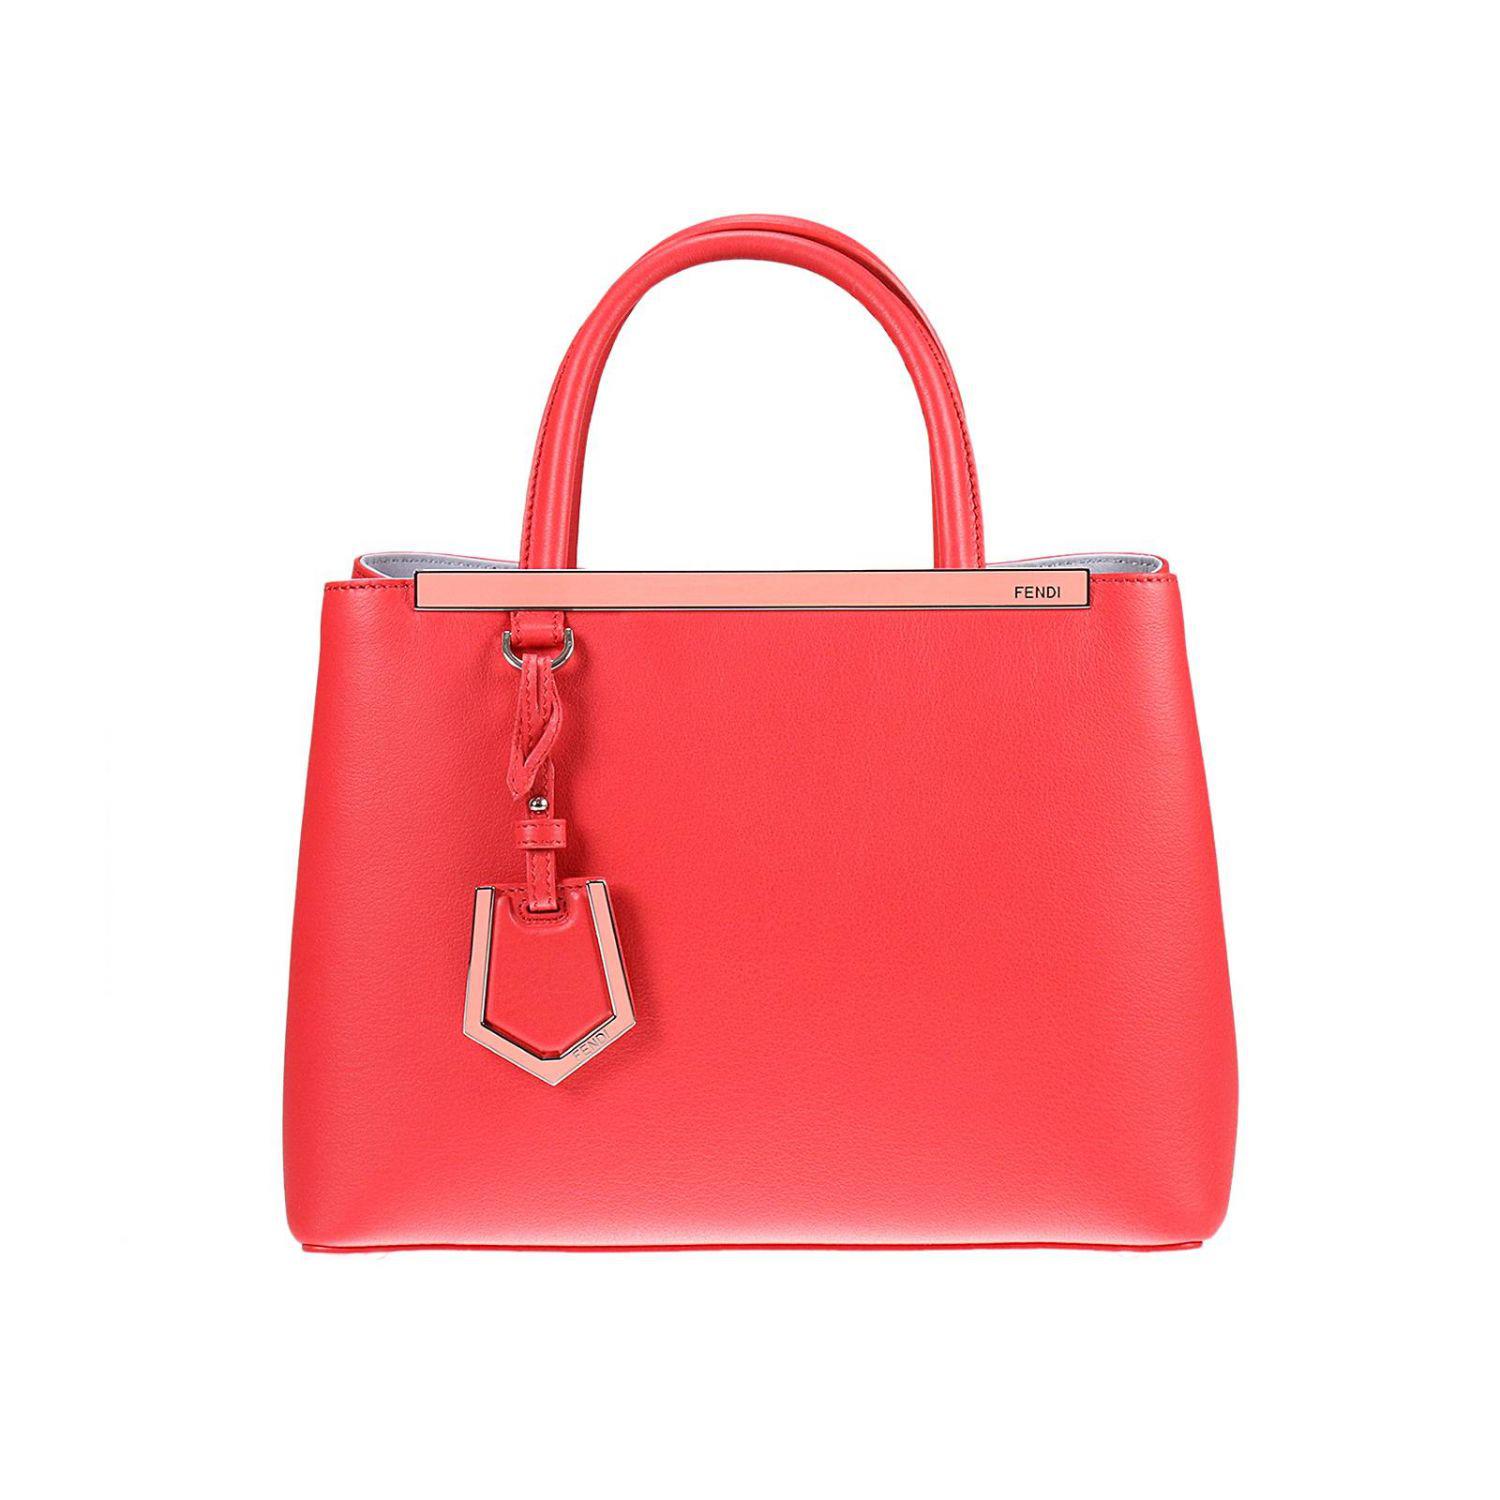 Fendi Leather Tote Bag in Red - Lyst